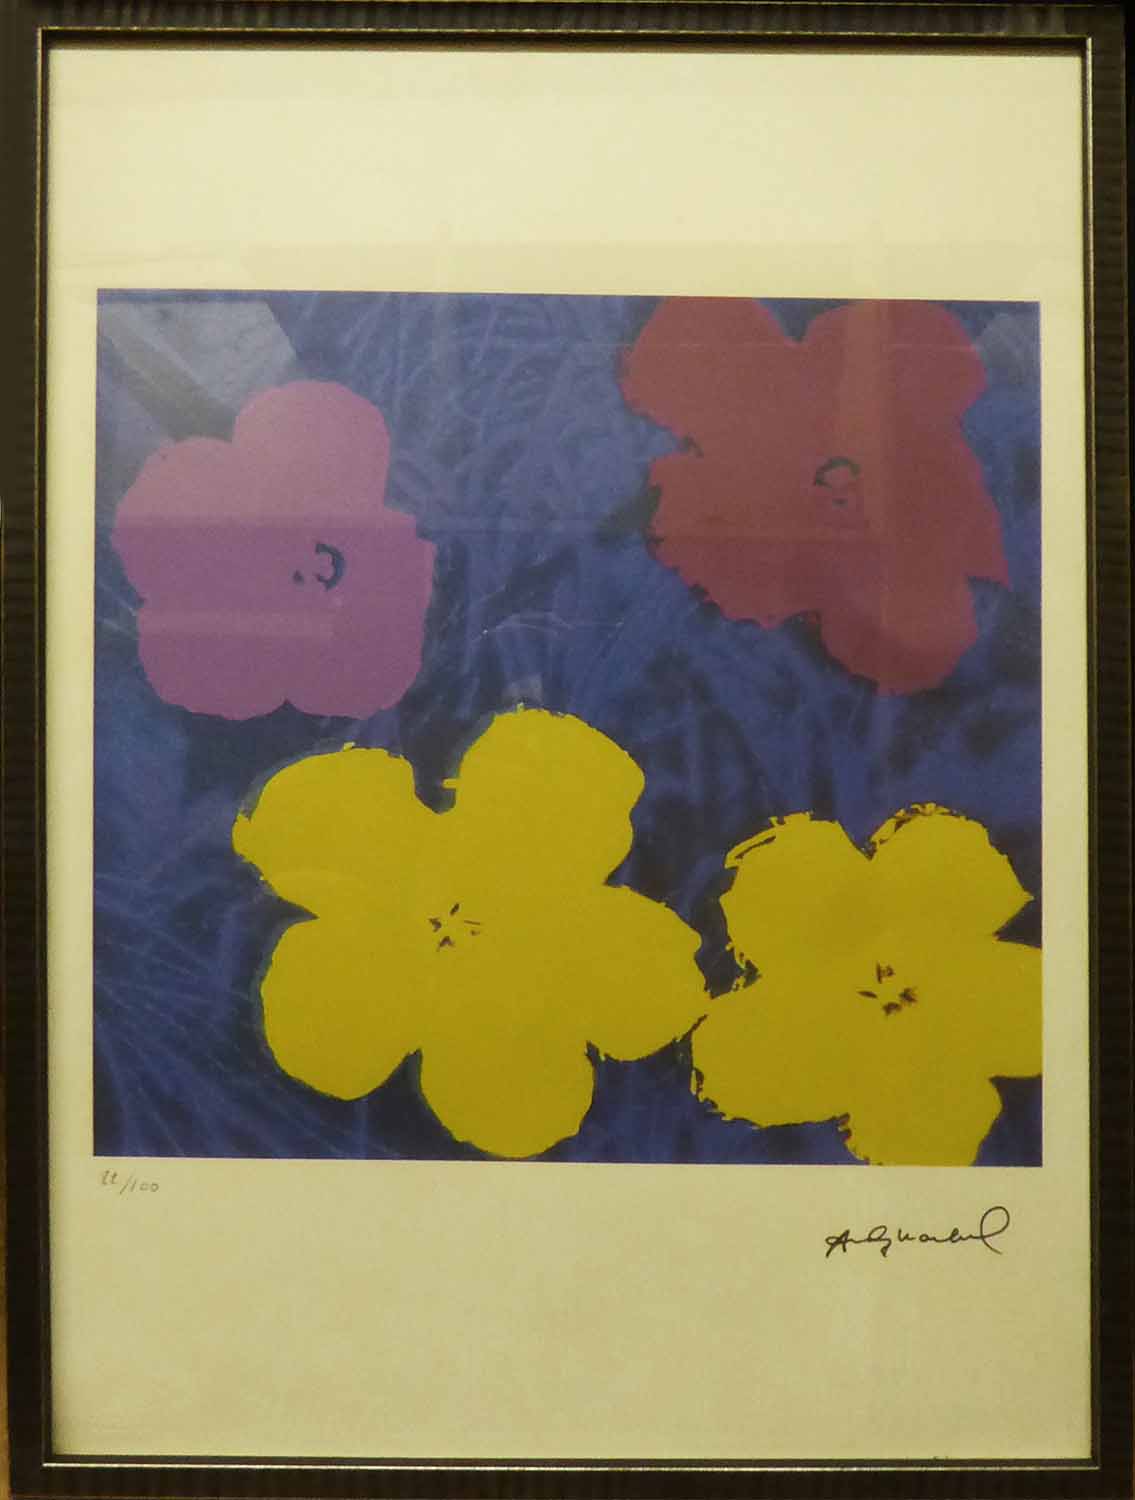 ANDY WARHOL 'Flowers', lithograph, from Leo Castelli gallery, stamped on reverse, edited by G.